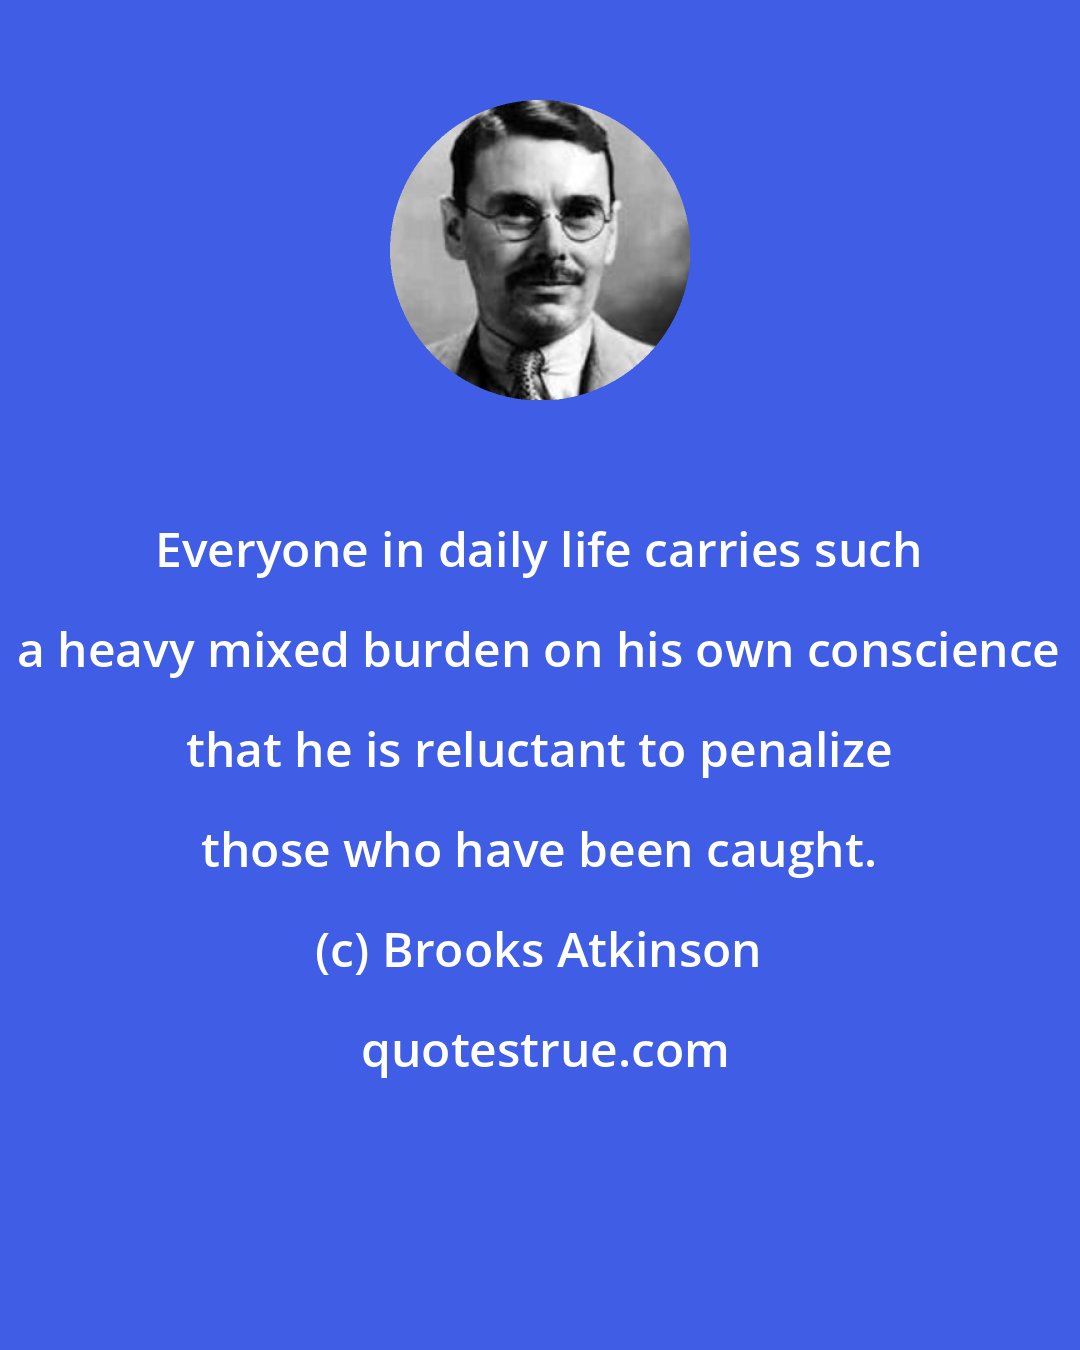 Brooks Atkinson: Everyone in daily life carries such a heavy mixed burden on his own conscience that he is reluctant to penalize those who have been caught.